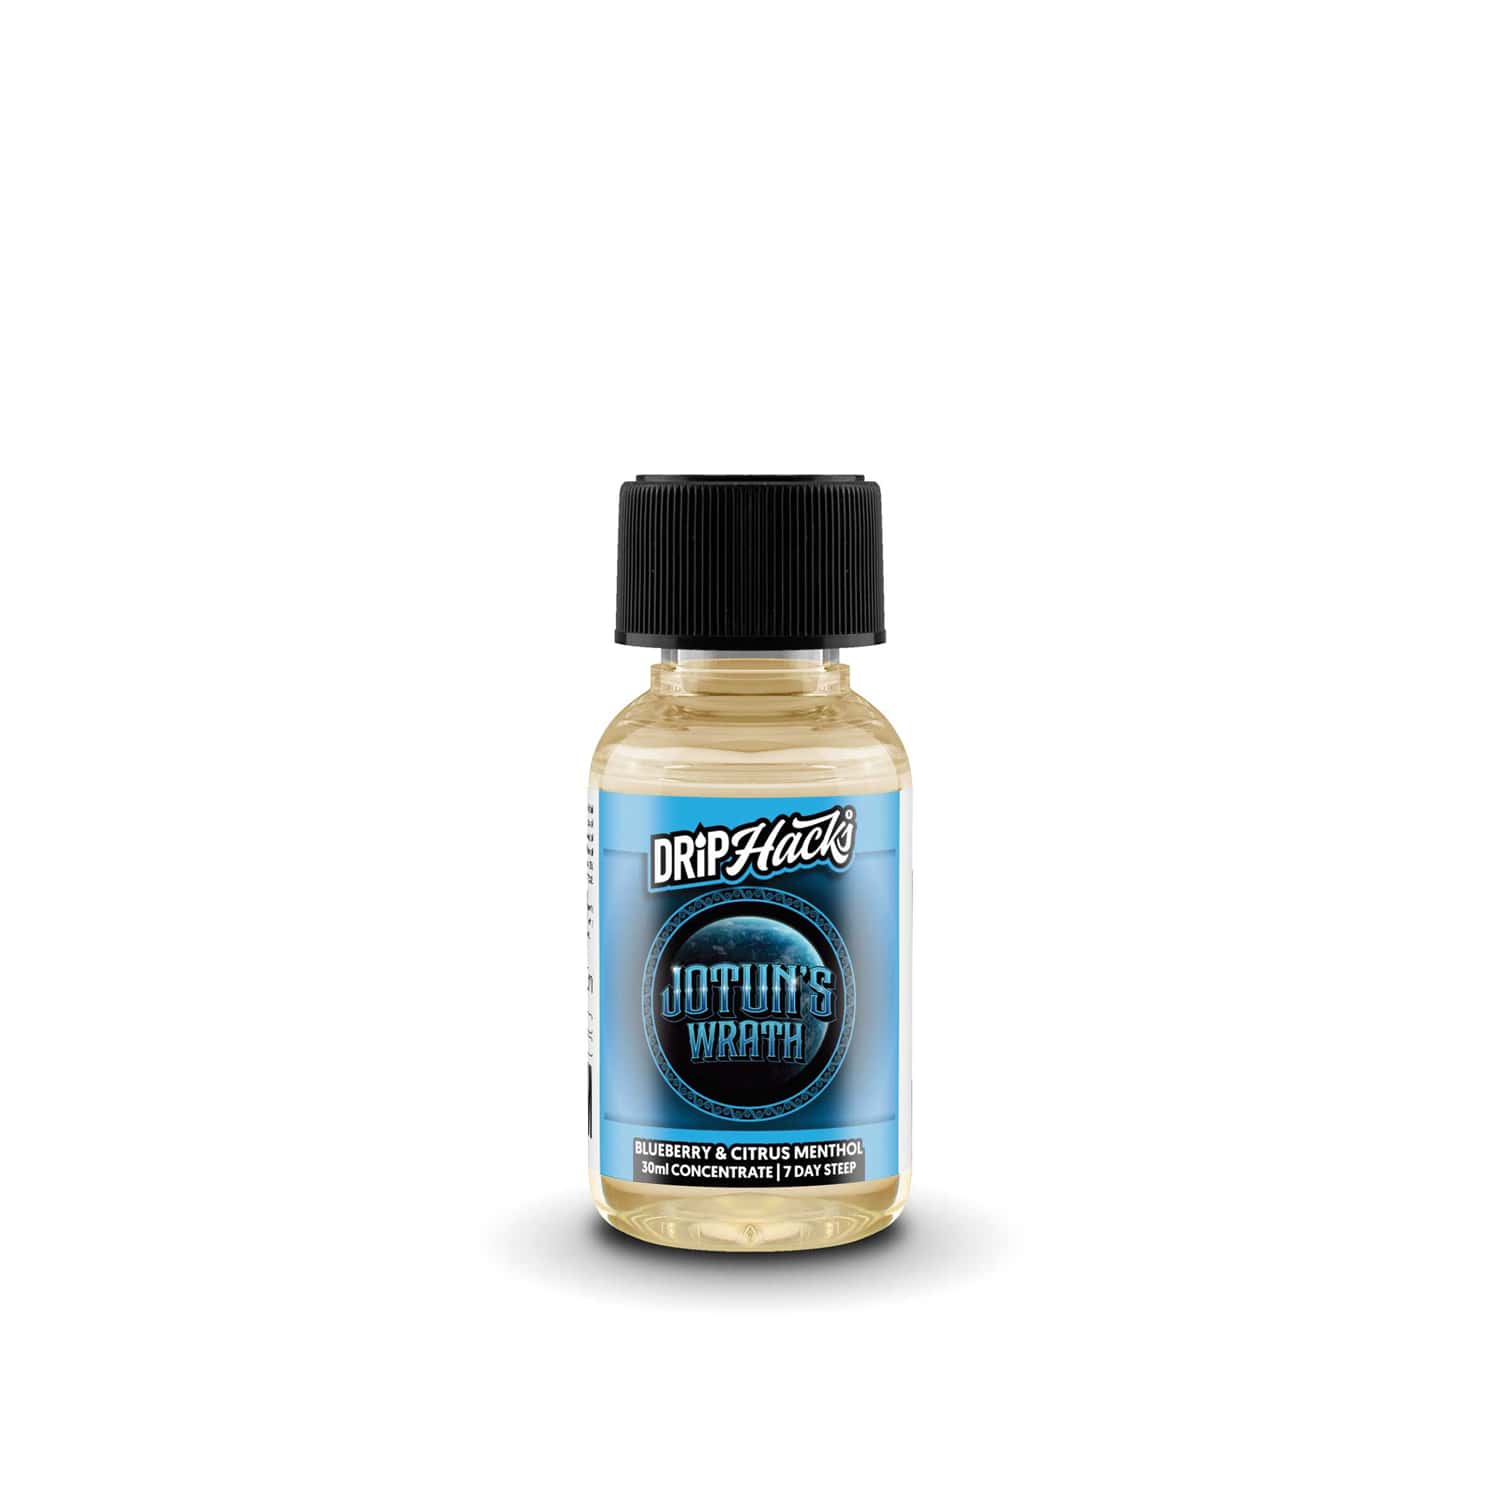 Jotun's Wrath Flavour Concentrate by Drip Hacks